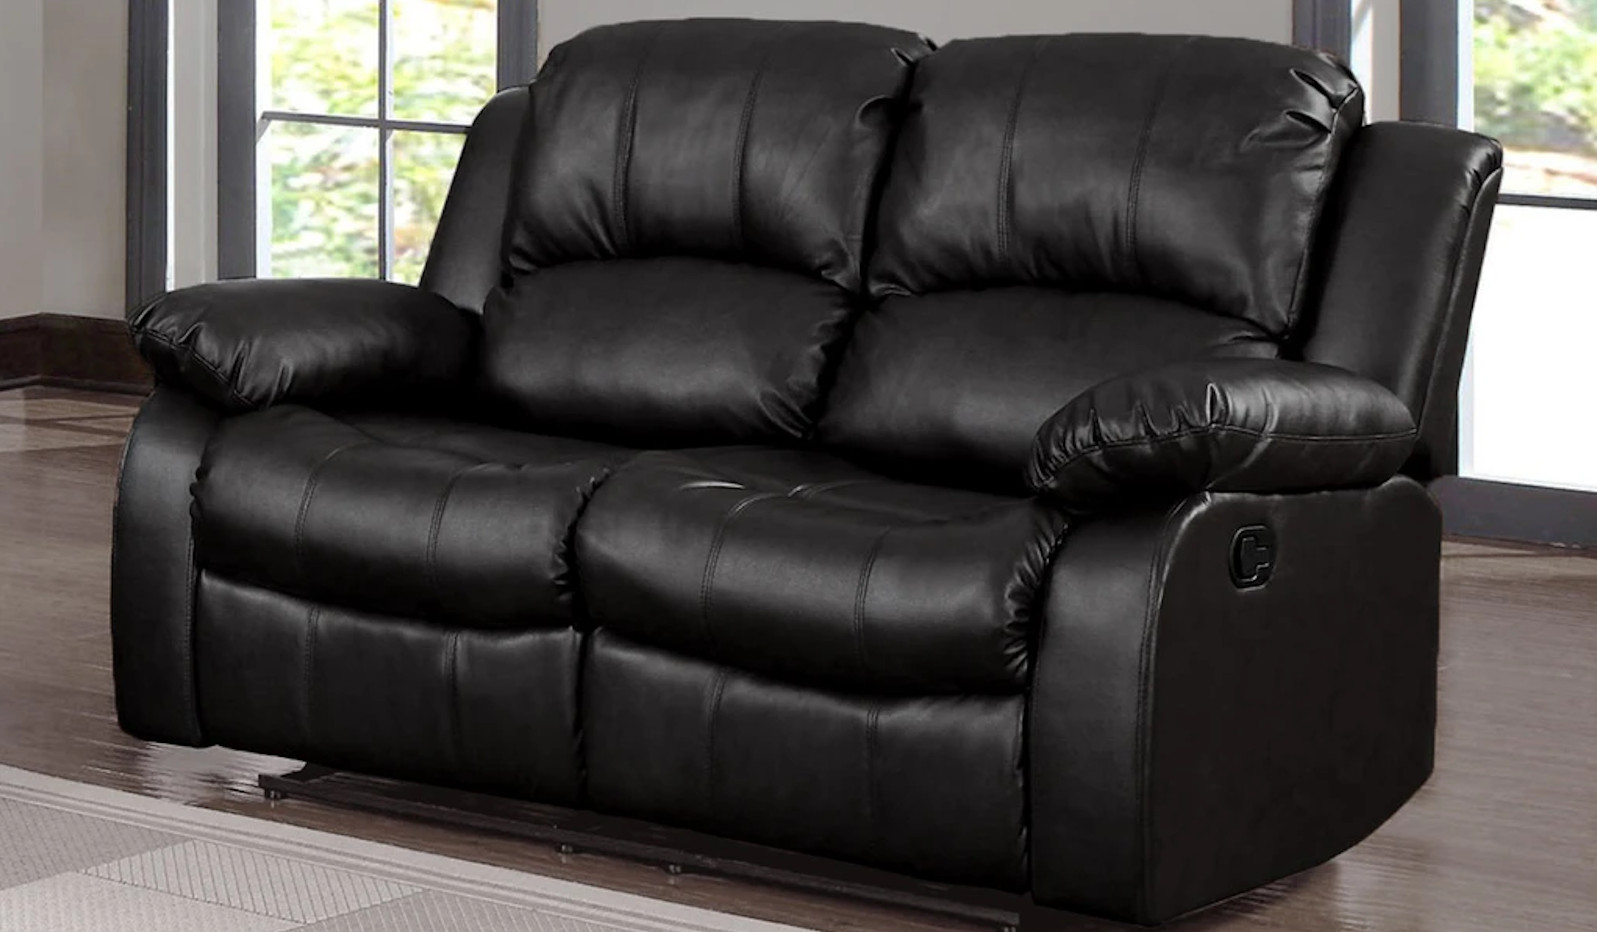 Closeout Price recliners